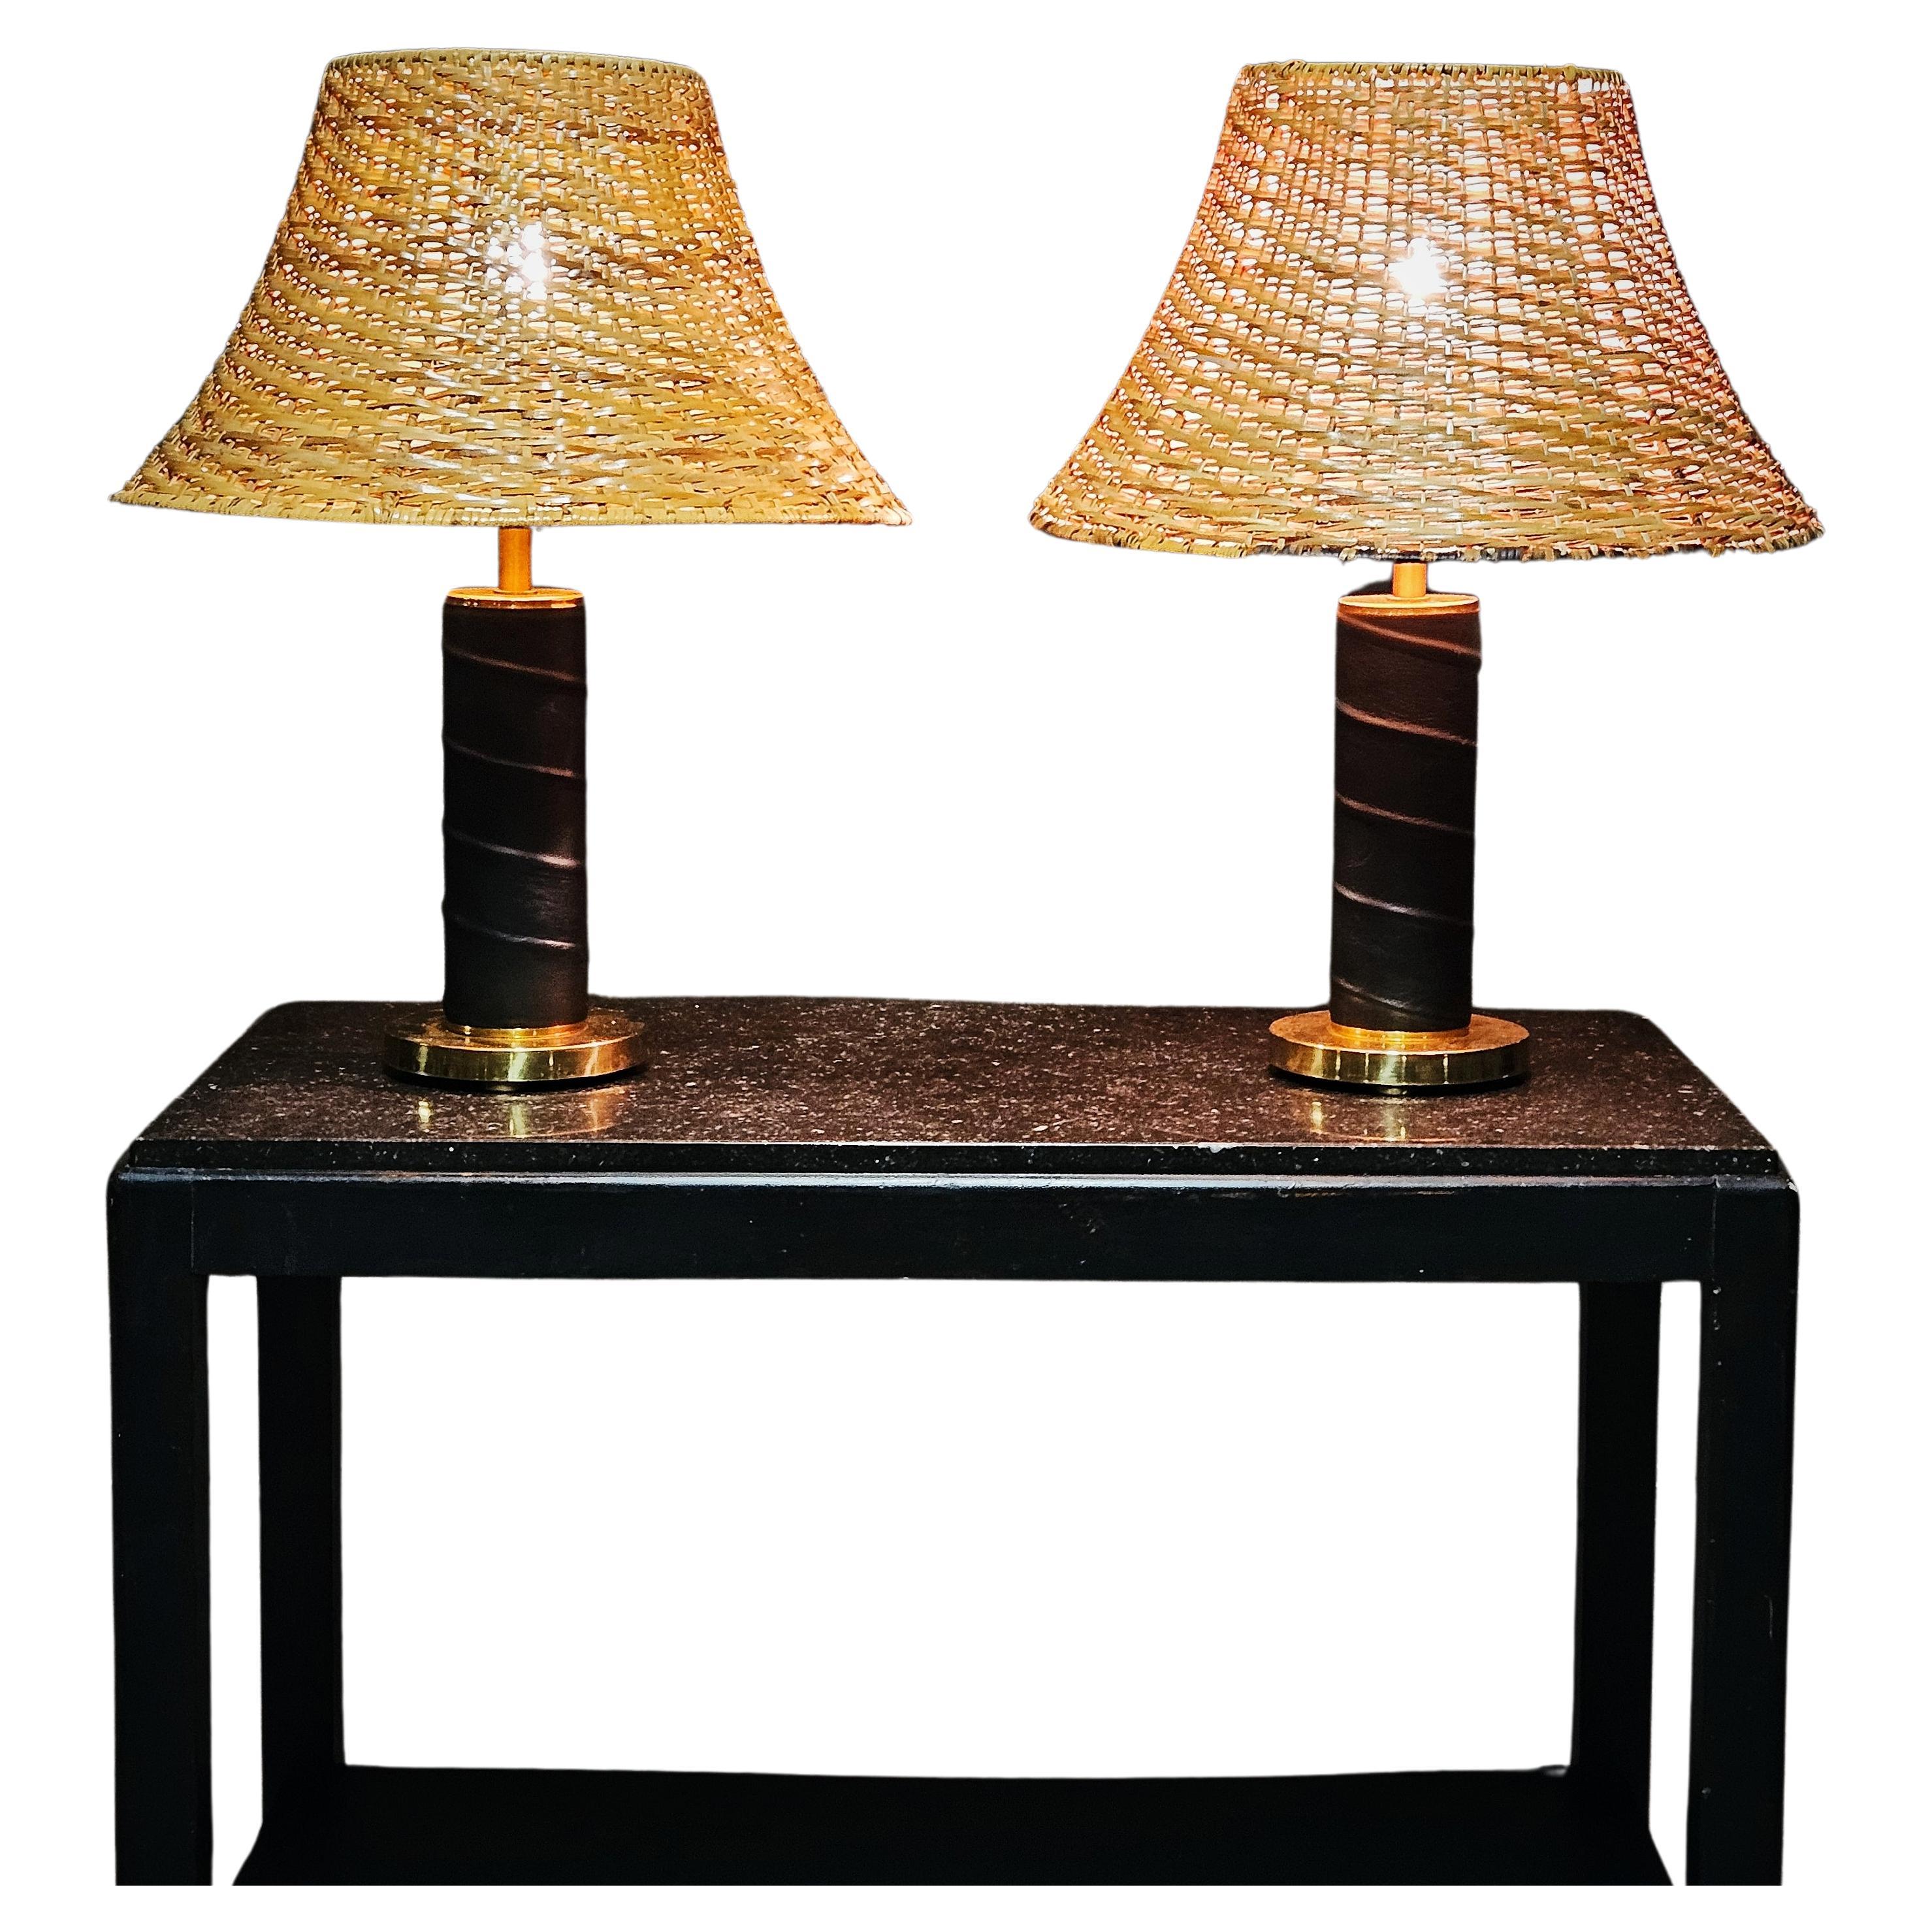 Scandinavian modern table lamps, brass wrapped in leather, Denmark, 1950s For Sale